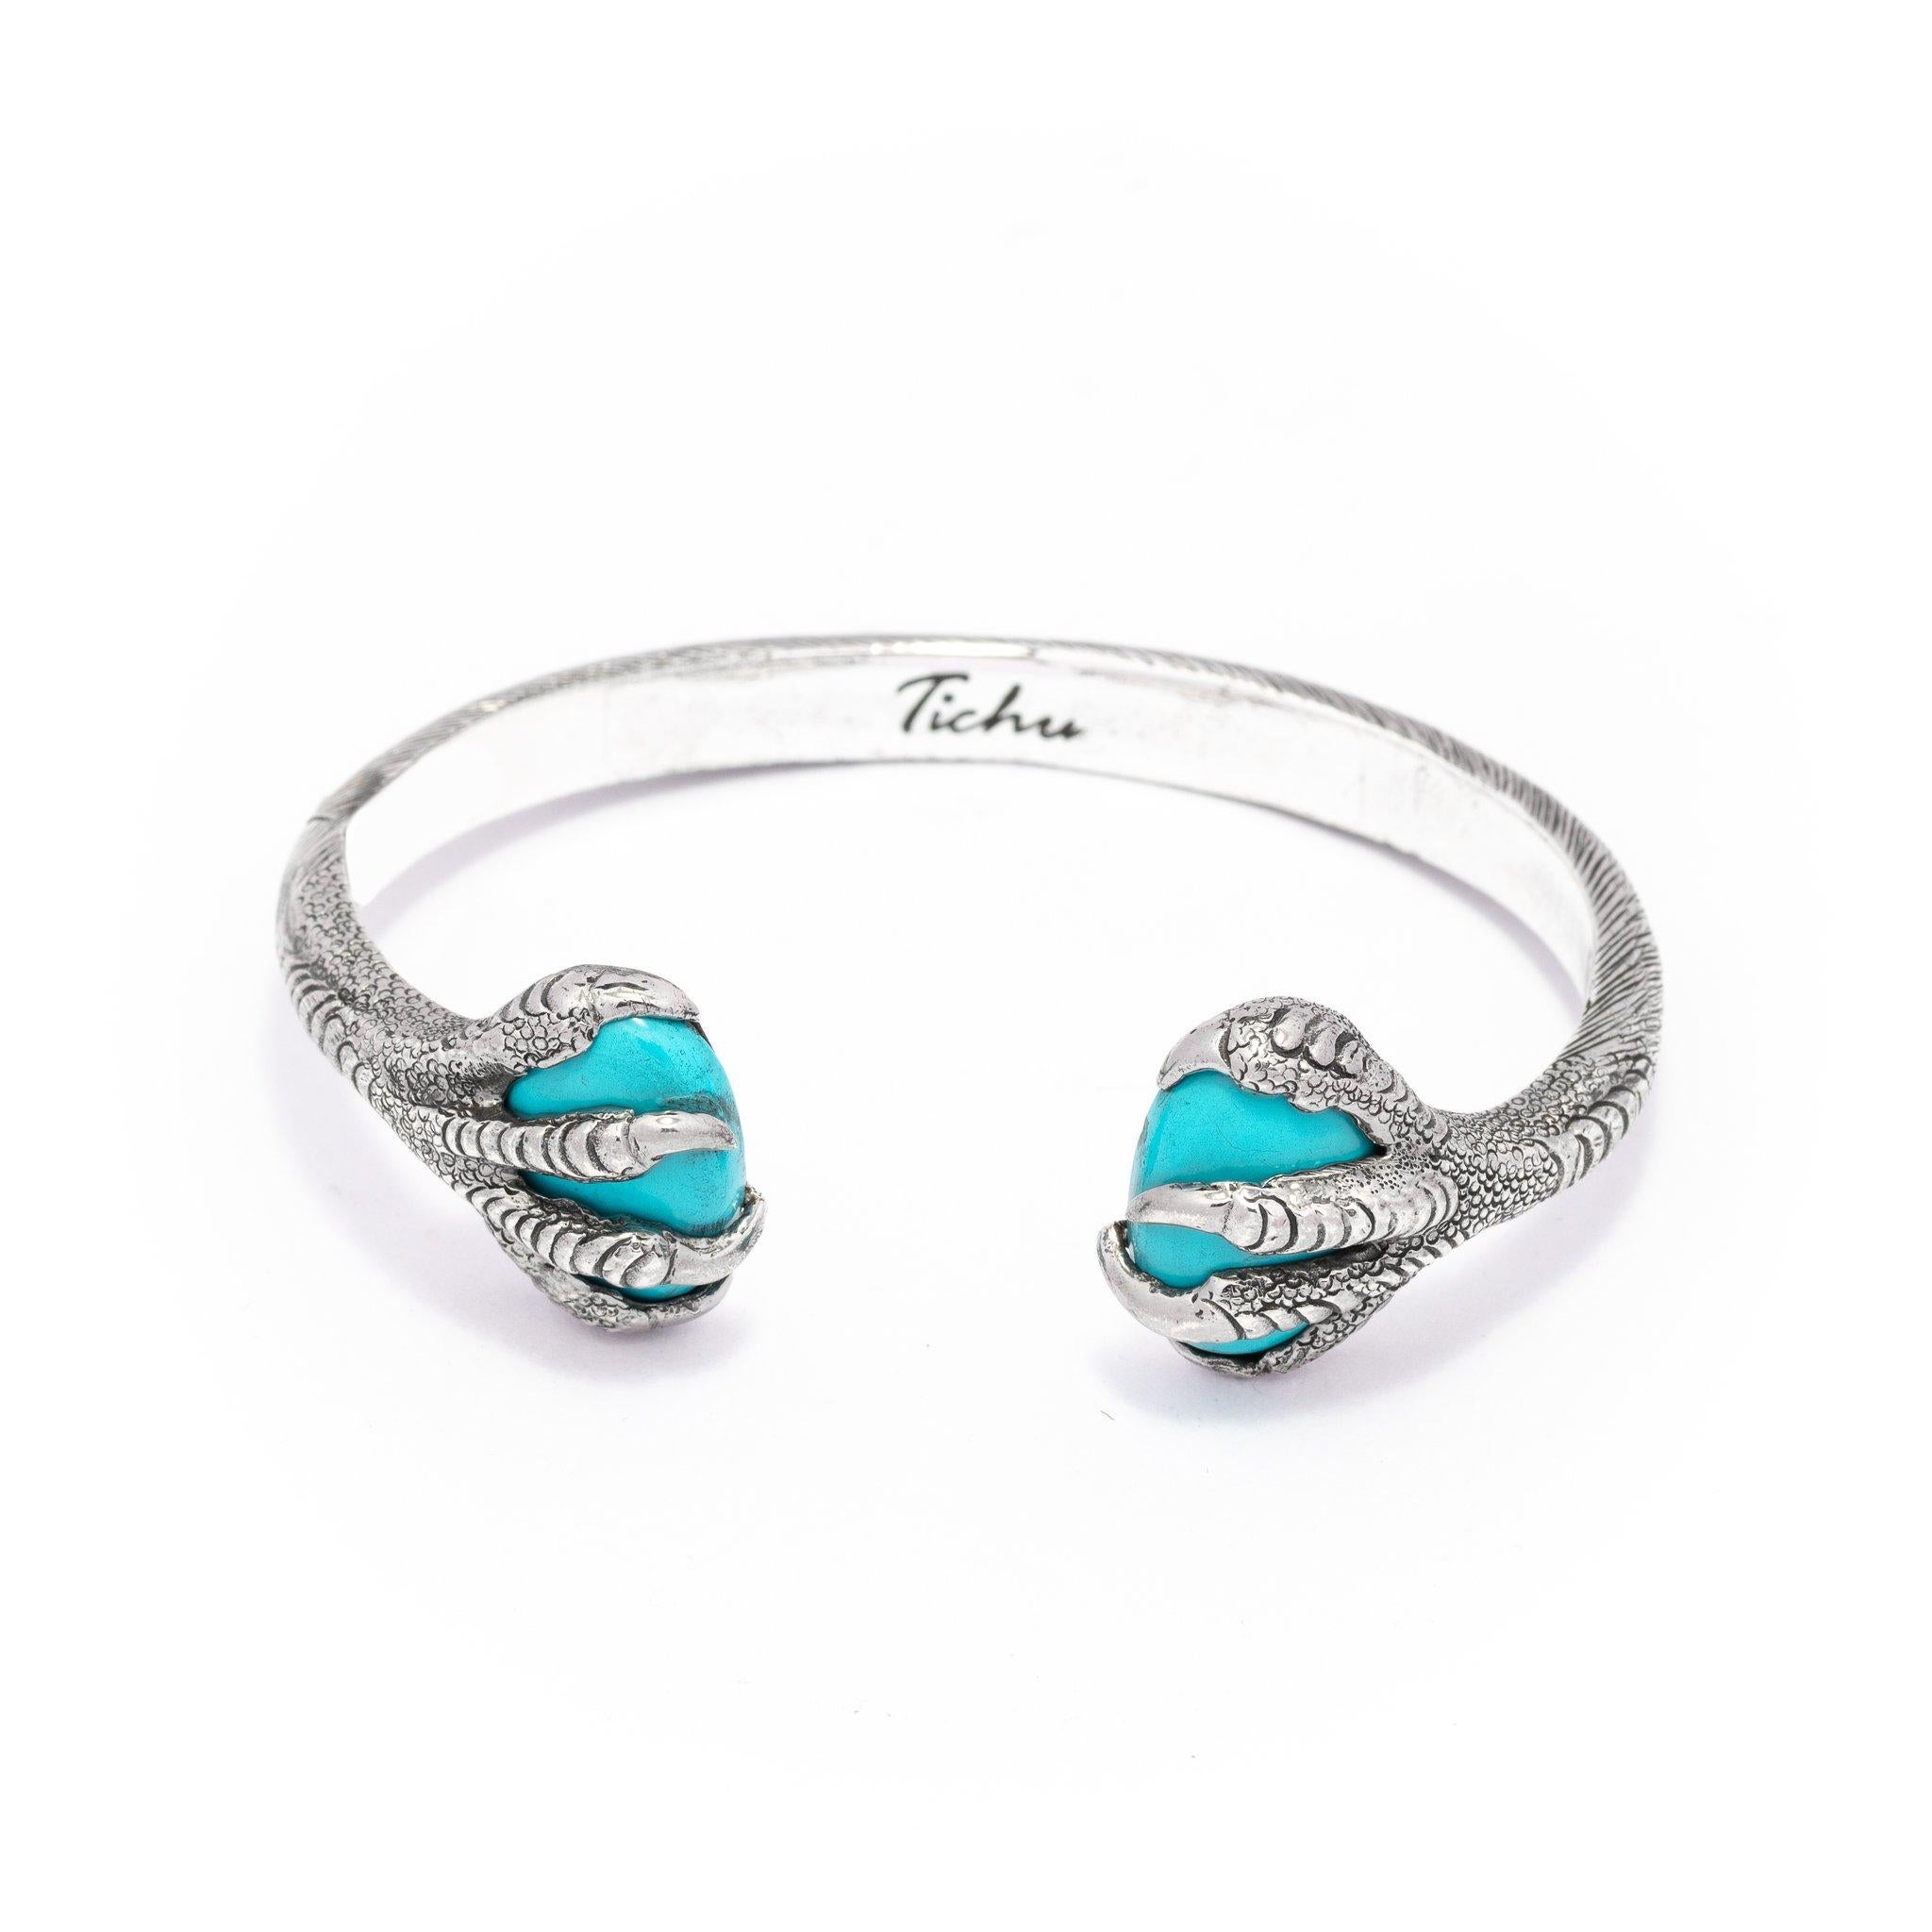 Cabochon Tichu Turquoise Eagle Claw Cuff in Silver Sterling & Crystal Quartz, Size 'S' For Sale